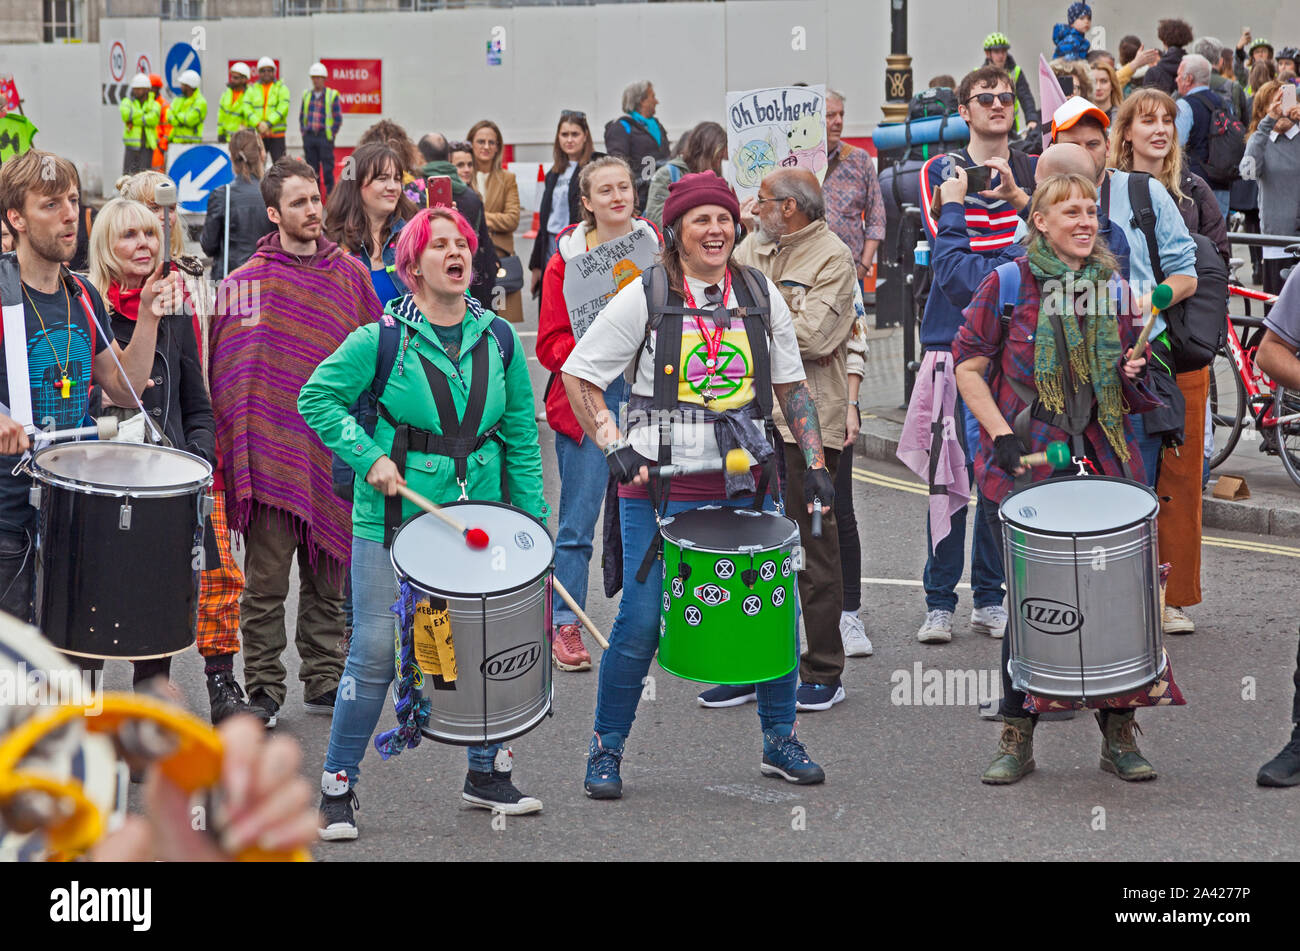 October 8th, 2019. The first day of Extinction Rebellion's occupation of Trafalgar Square.  Drummers beating out the Extinction Rebellion message. Stock Photo